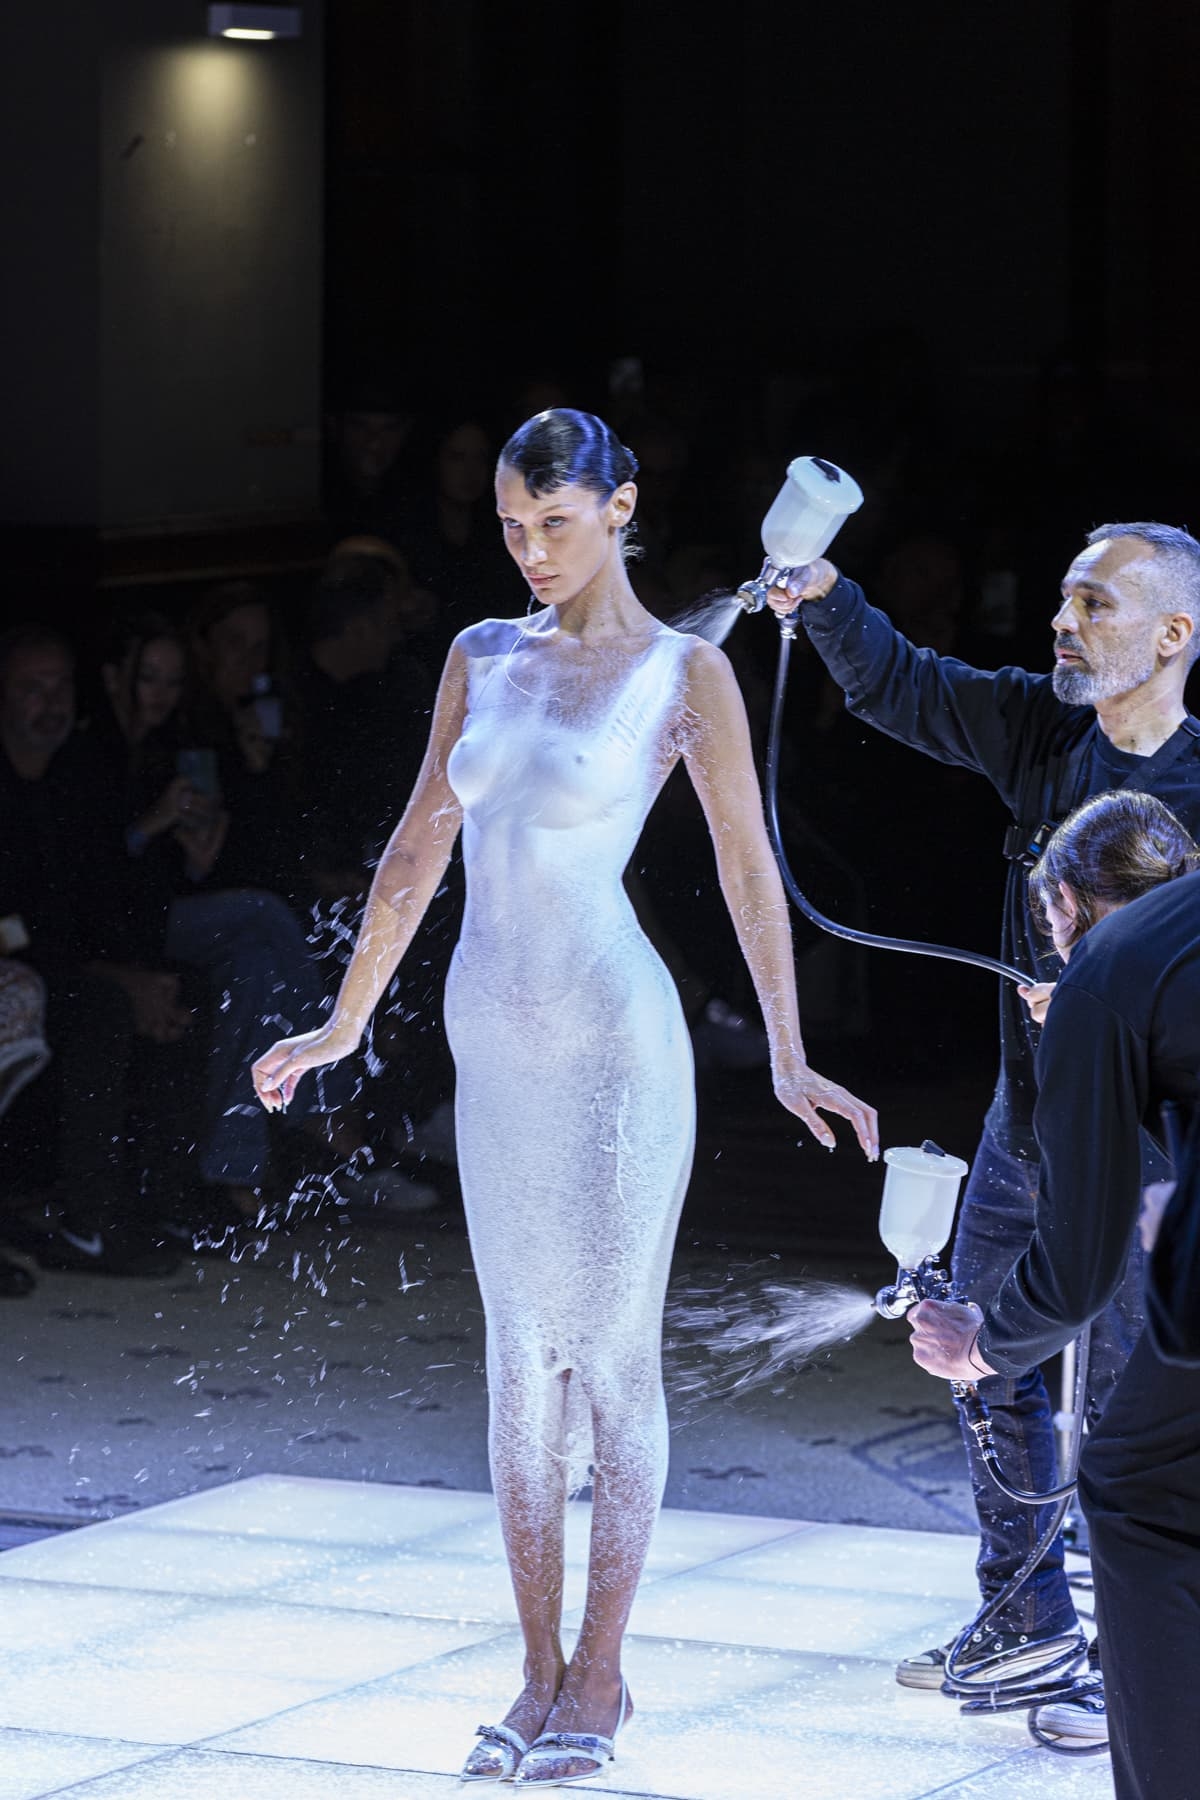 FASHION MONTH 2022 HIGHLIGHT MOMENTS